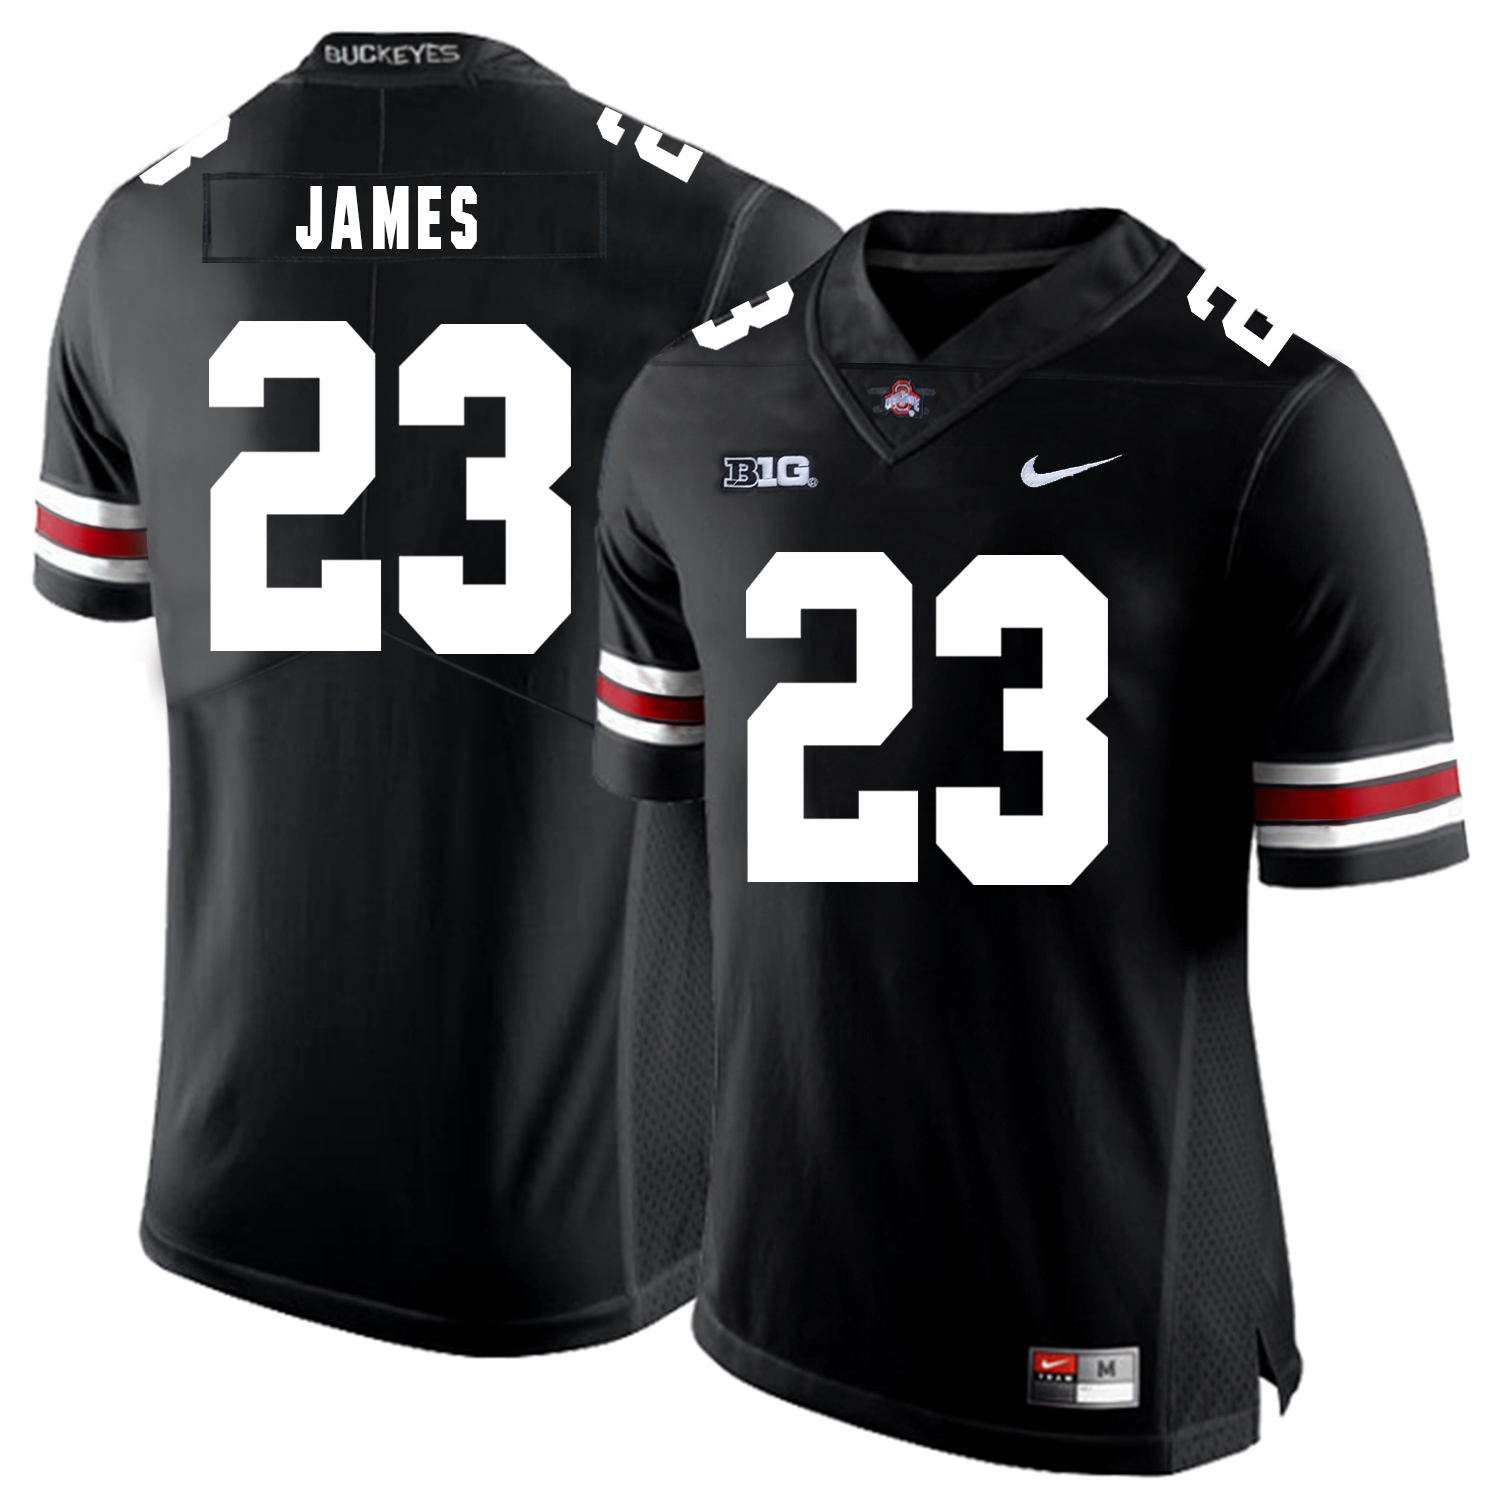 Ohio State Buckeyes 23 Lebron James Black Nike College Football Jersey - Click Image to Close